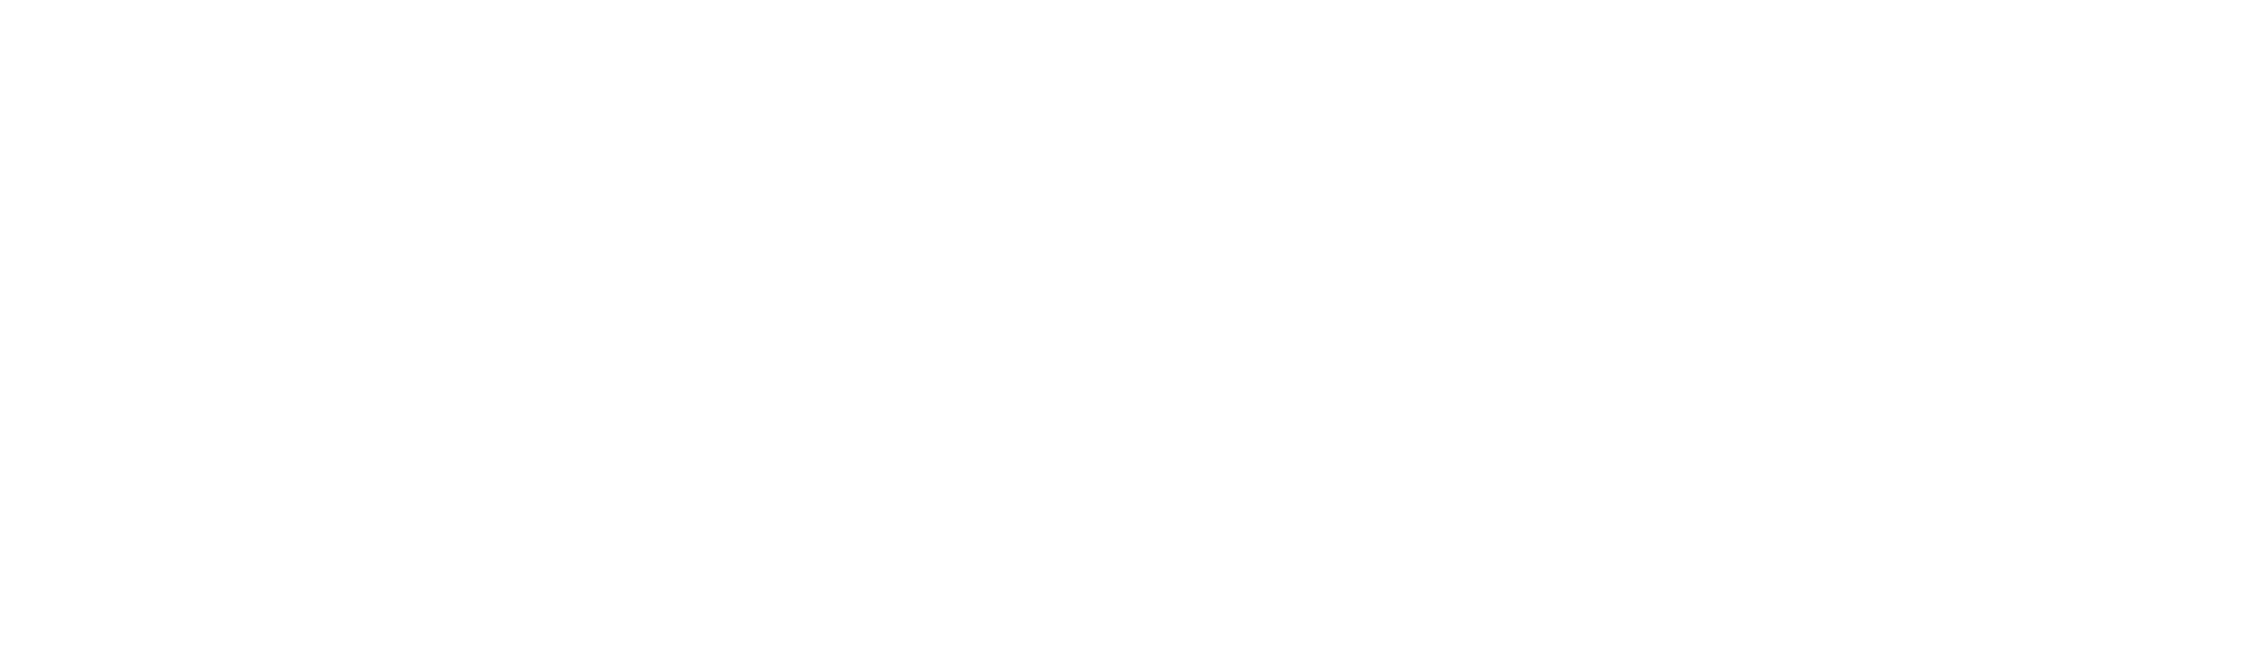 503 USER LOVE COMMENT